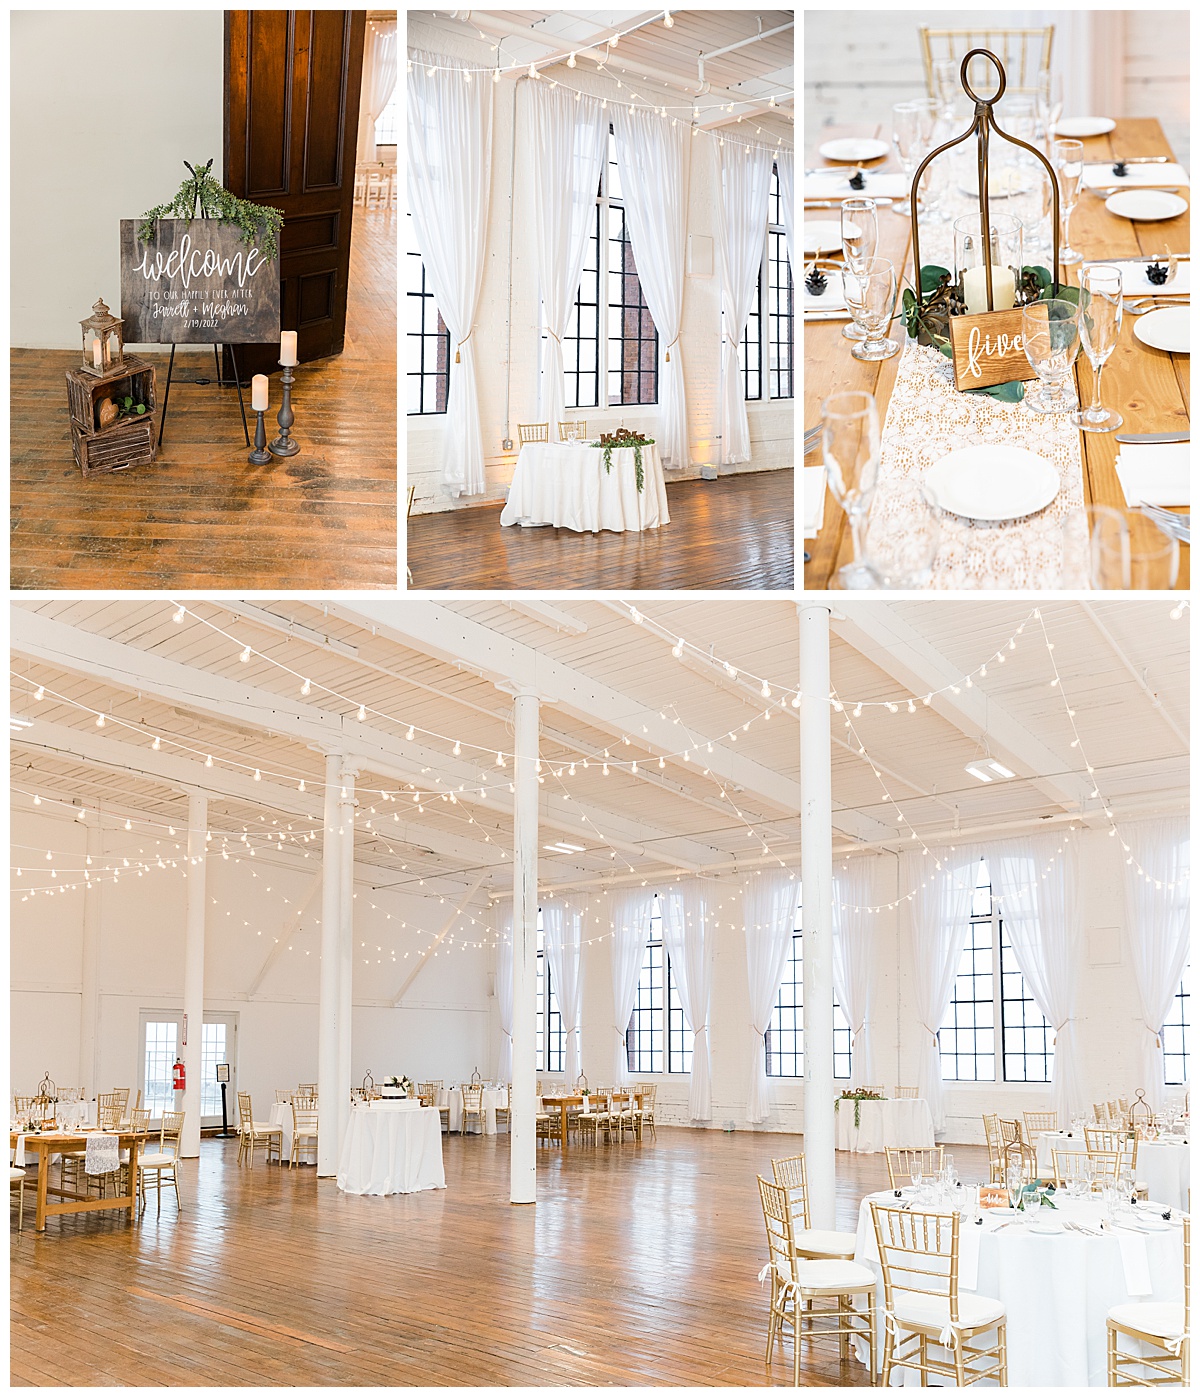 The Kilburn Mills neutral color scheme allows for all different types of wedding decor. 